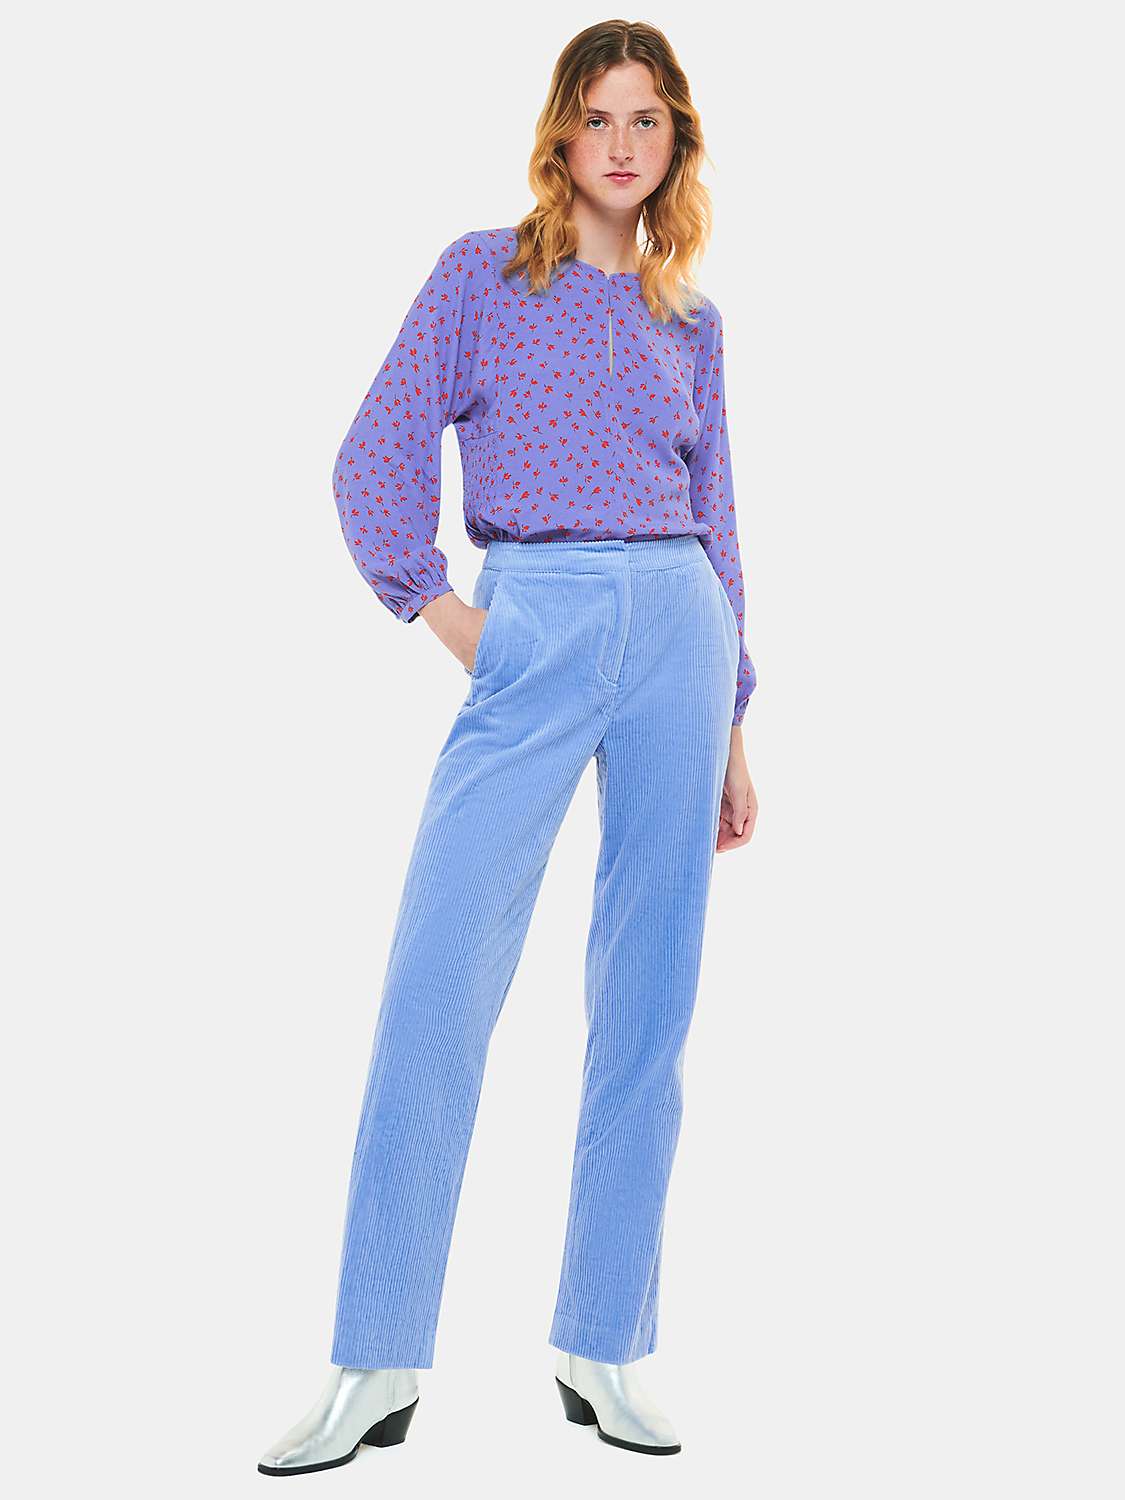 Buy Whistles Scattered Petal Print Blouse, Purple/Red Online at johnlewis.com